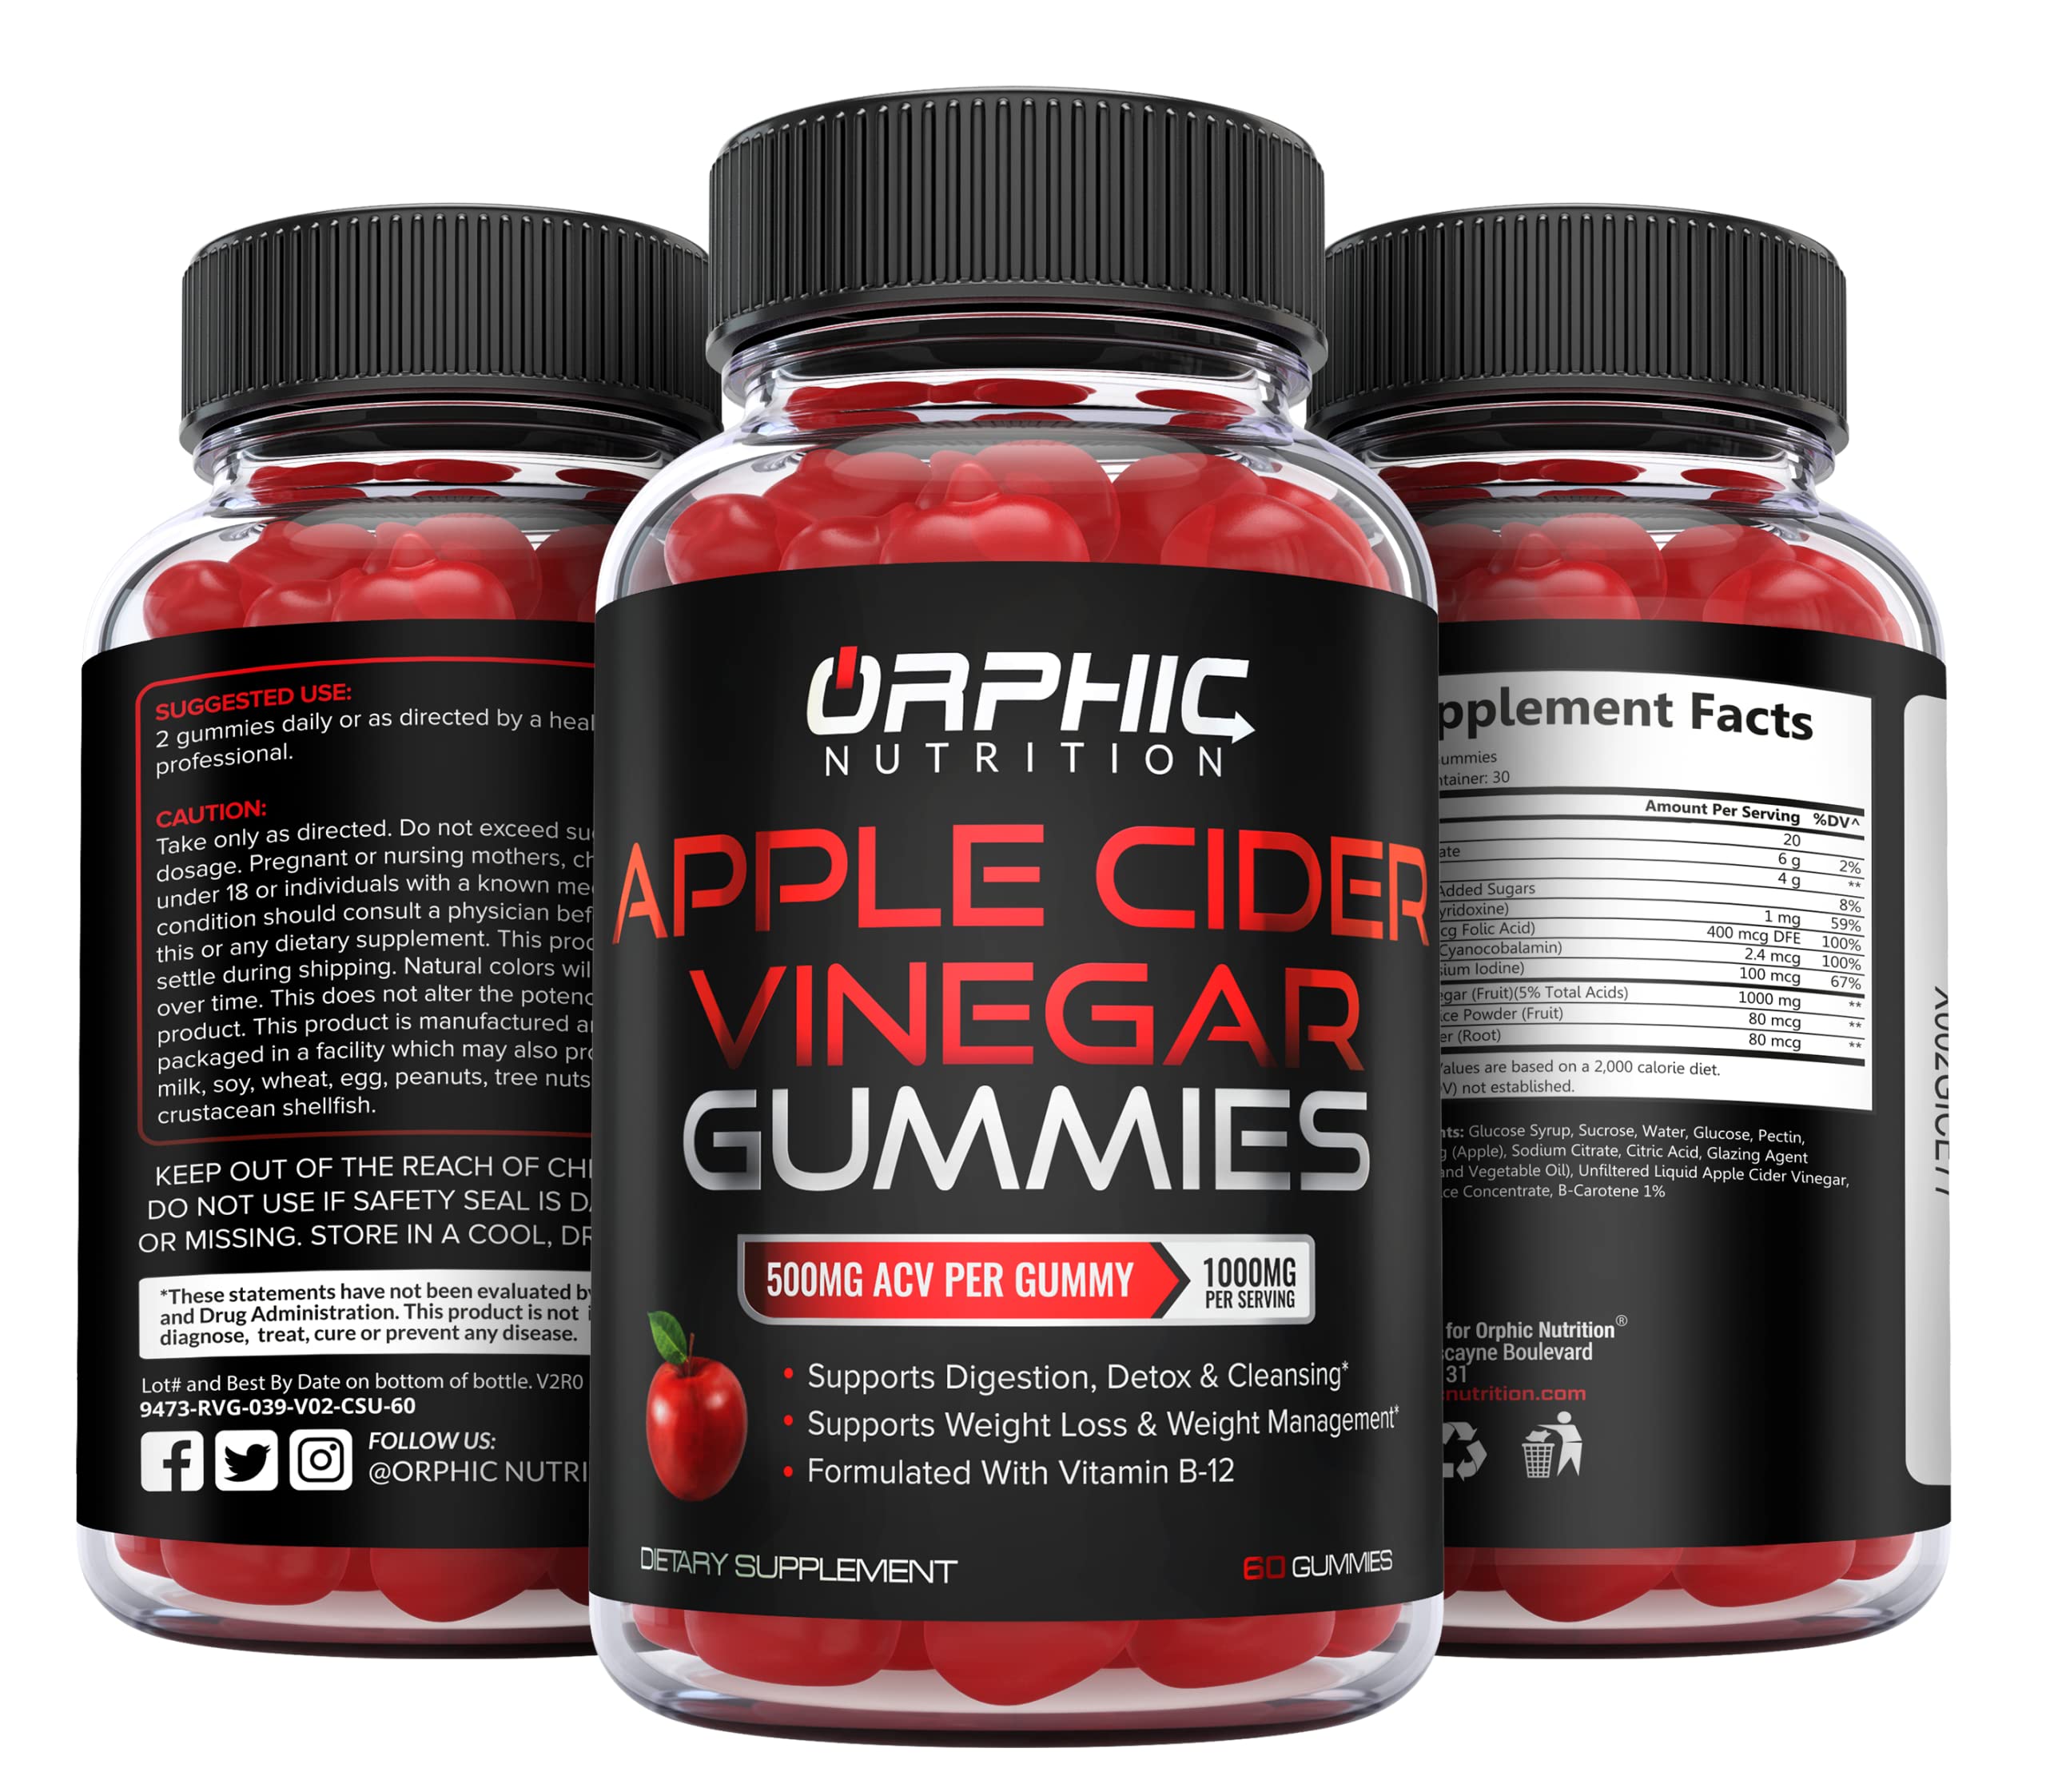 Apple Cider Vinegar Gummies - 1000mg -Formulated to Support Weight Loss Efforts, Normal Energy Levels & Gut Health* - Supports Digestion, Detox & Cleansing* - ACV Gummies W/VIT B12, Beetroot